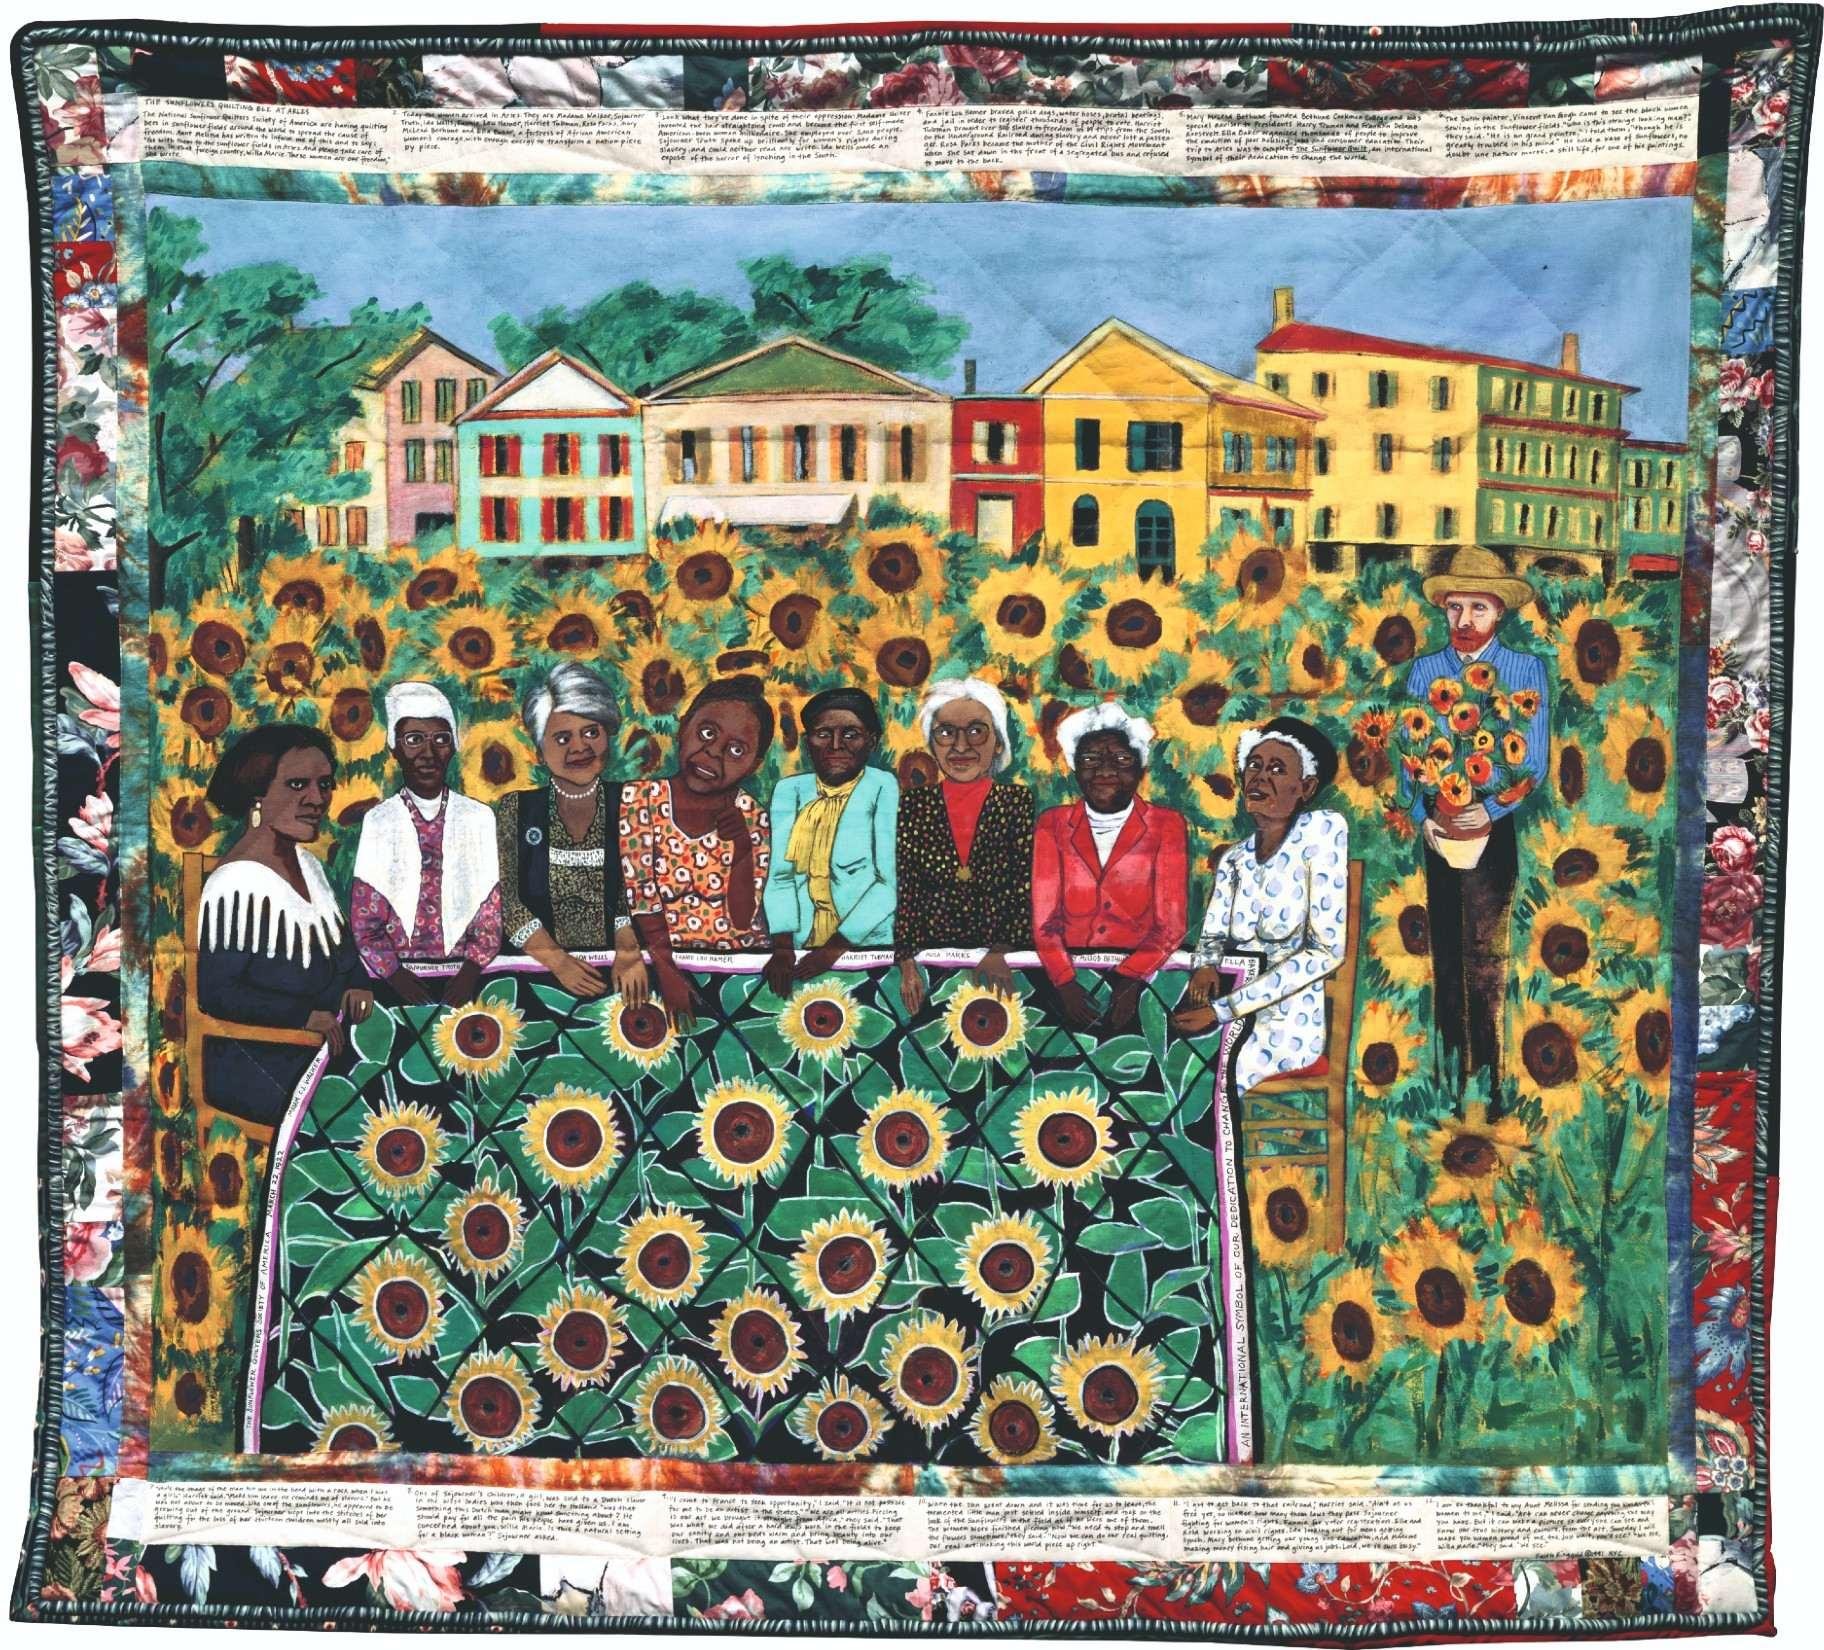 “The Sunflowers Quilting Bee at Arles” by Faith Ringgold, 1991.